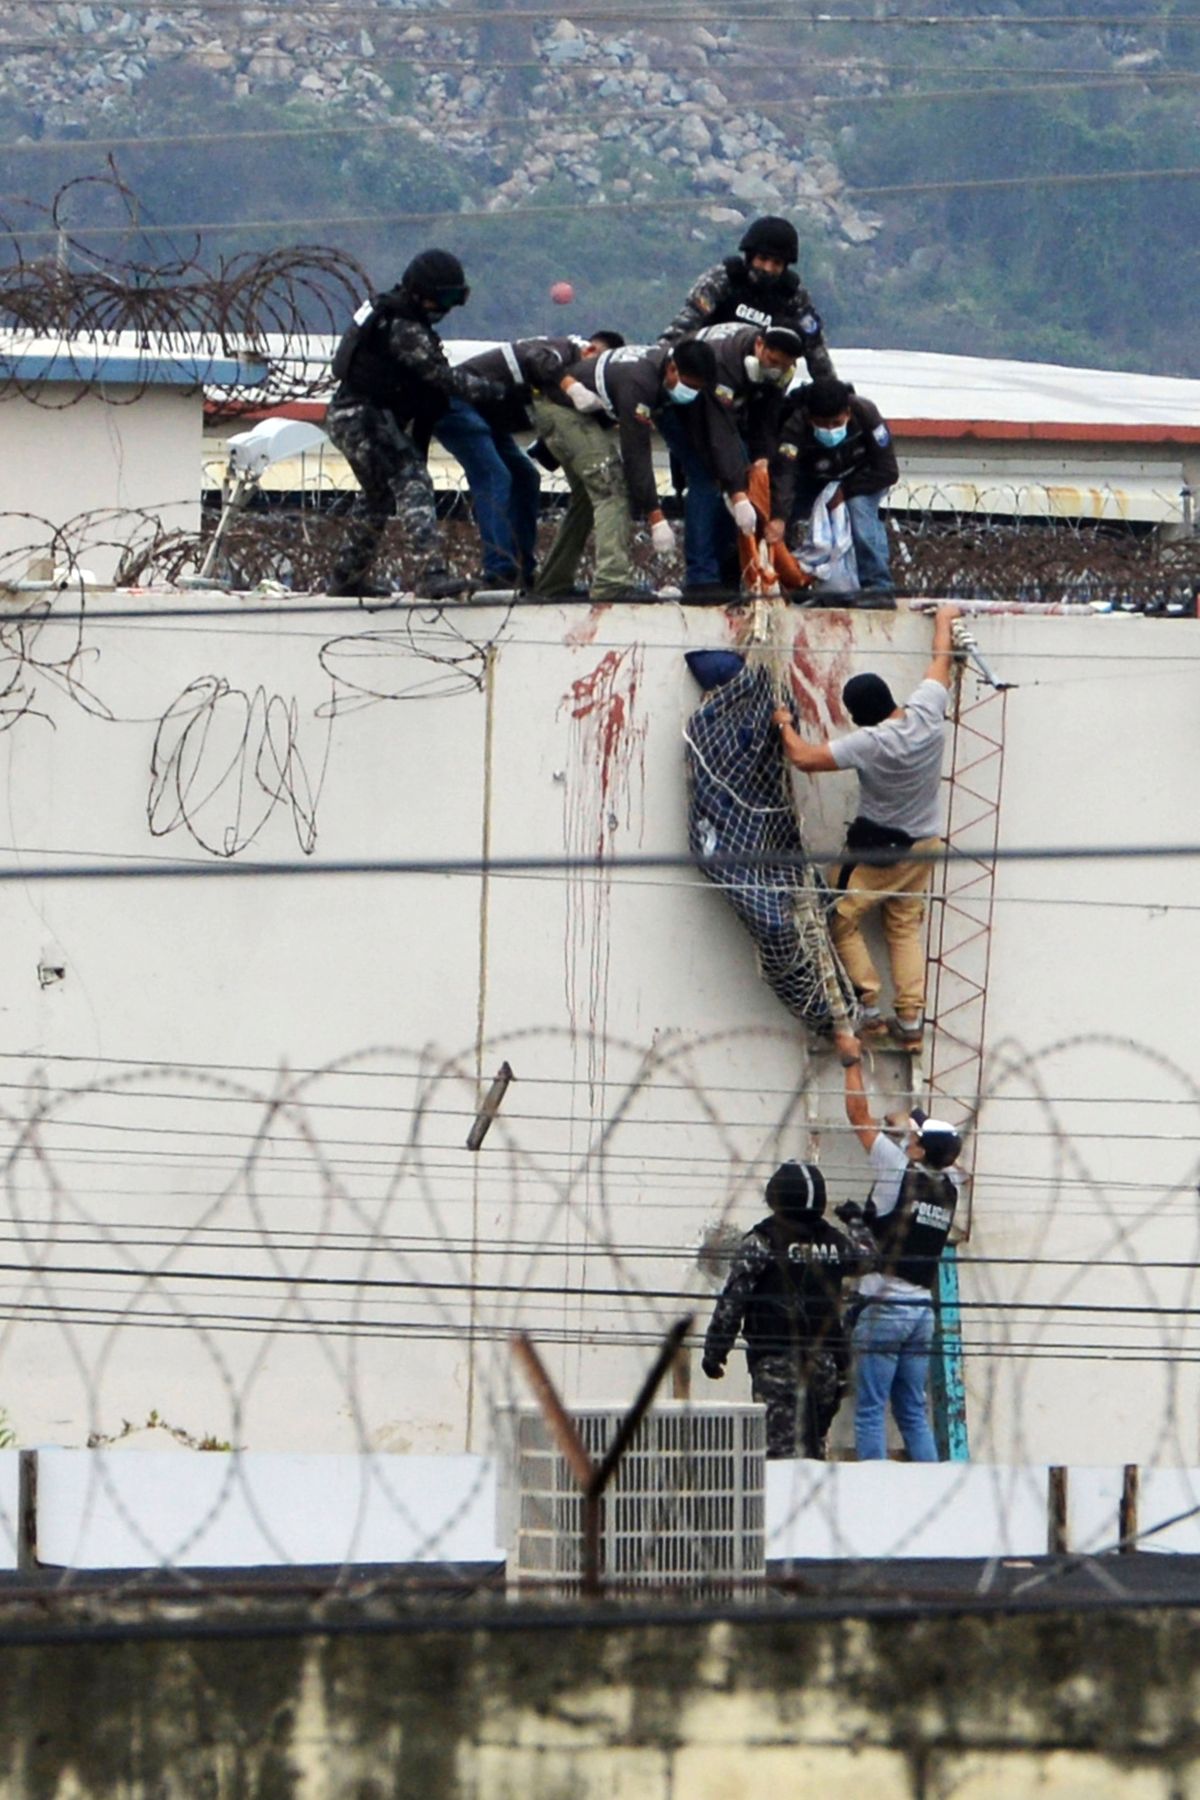 Police lower the body of a prisoner from the roof of the Litoral penitentiary the morning after riots broke out inside the jail in Guayaquil, Ecuador, Saturday, Nov. 13, 2021.  (Jose Sanchez)